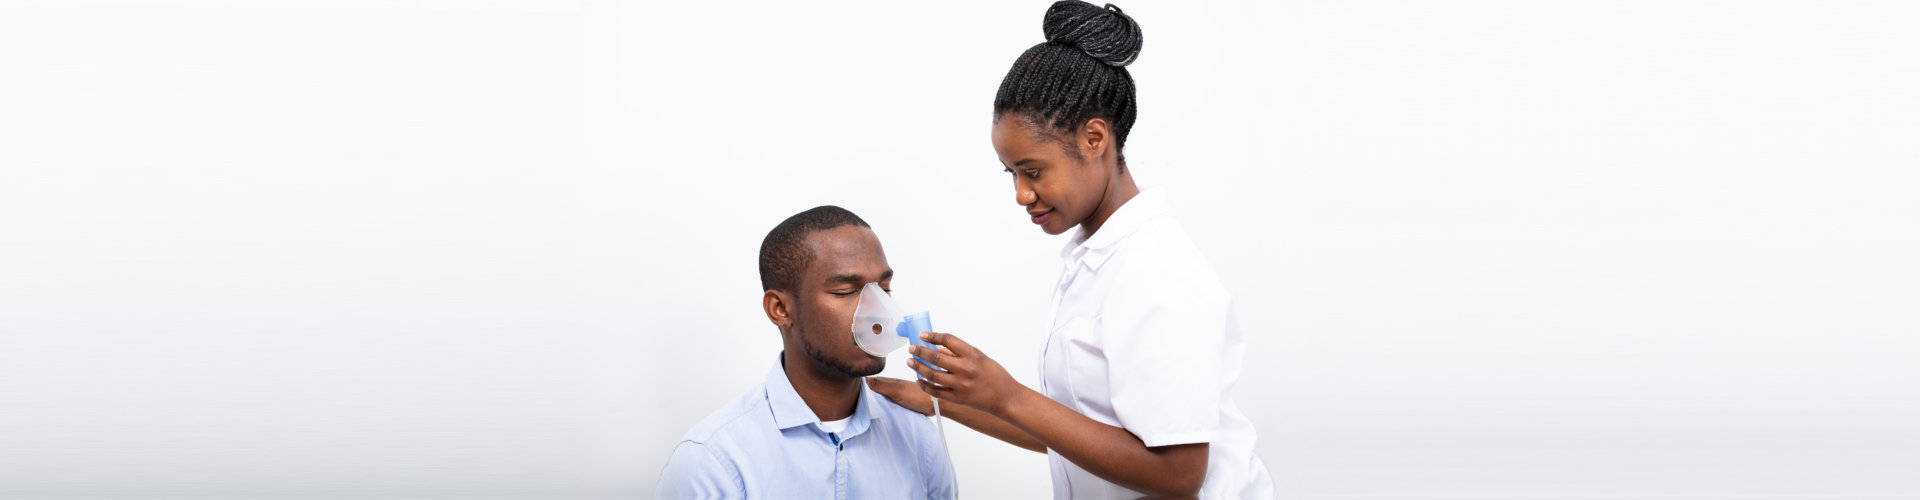 adult woman treating patient with asthma